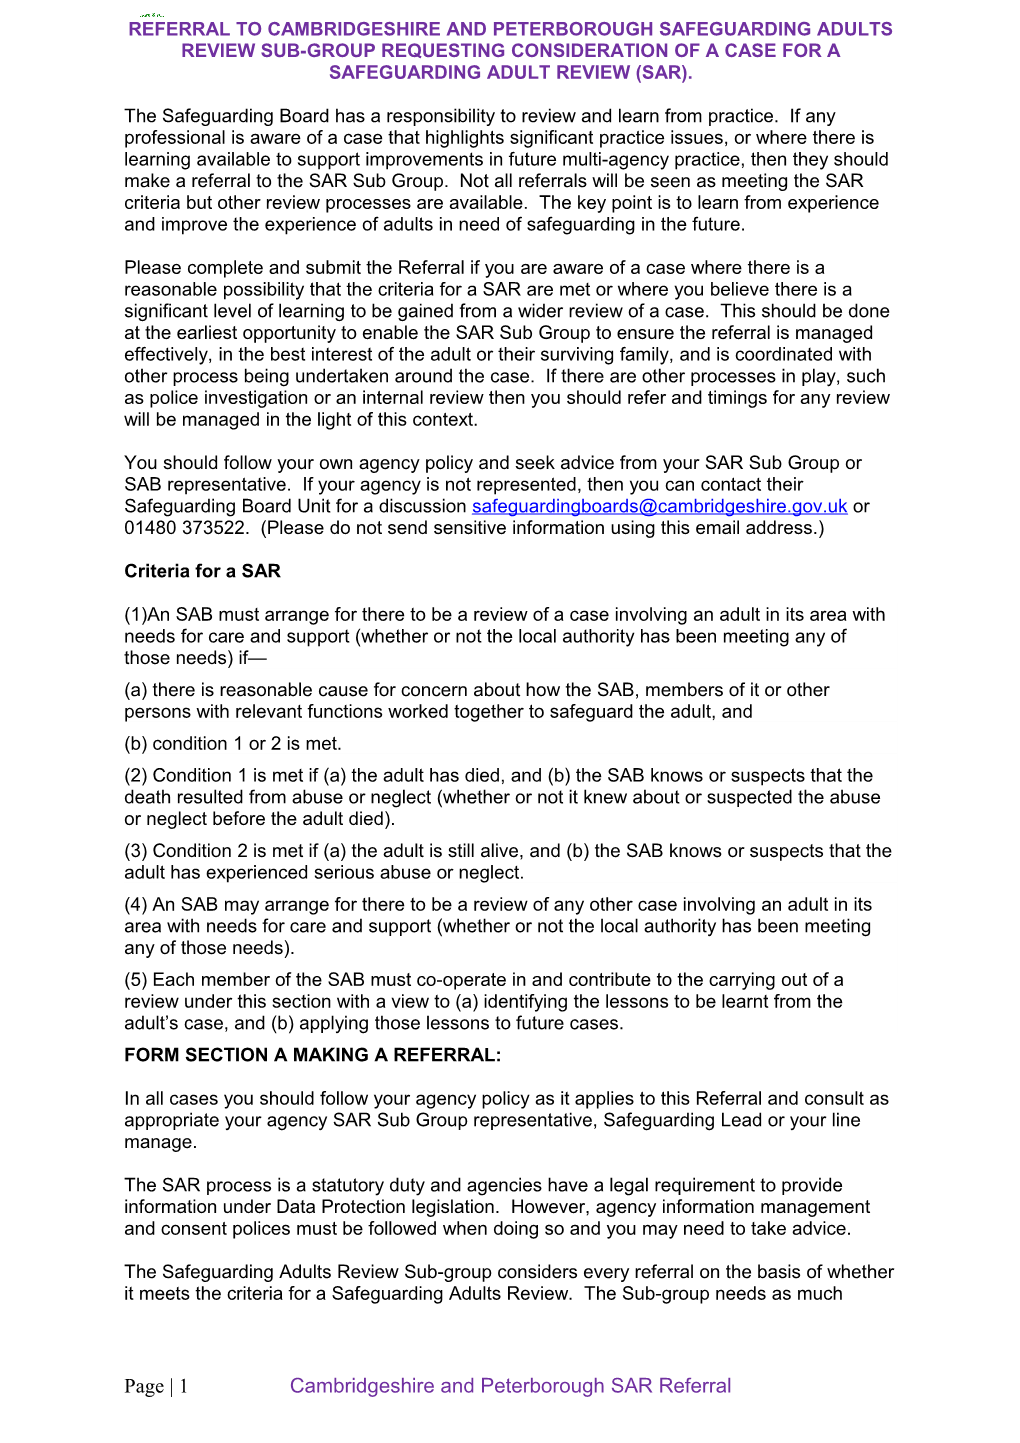 Referral to Cambridgeshire and Peterborough Safeguarding Adults Review Sub-Group Requesting